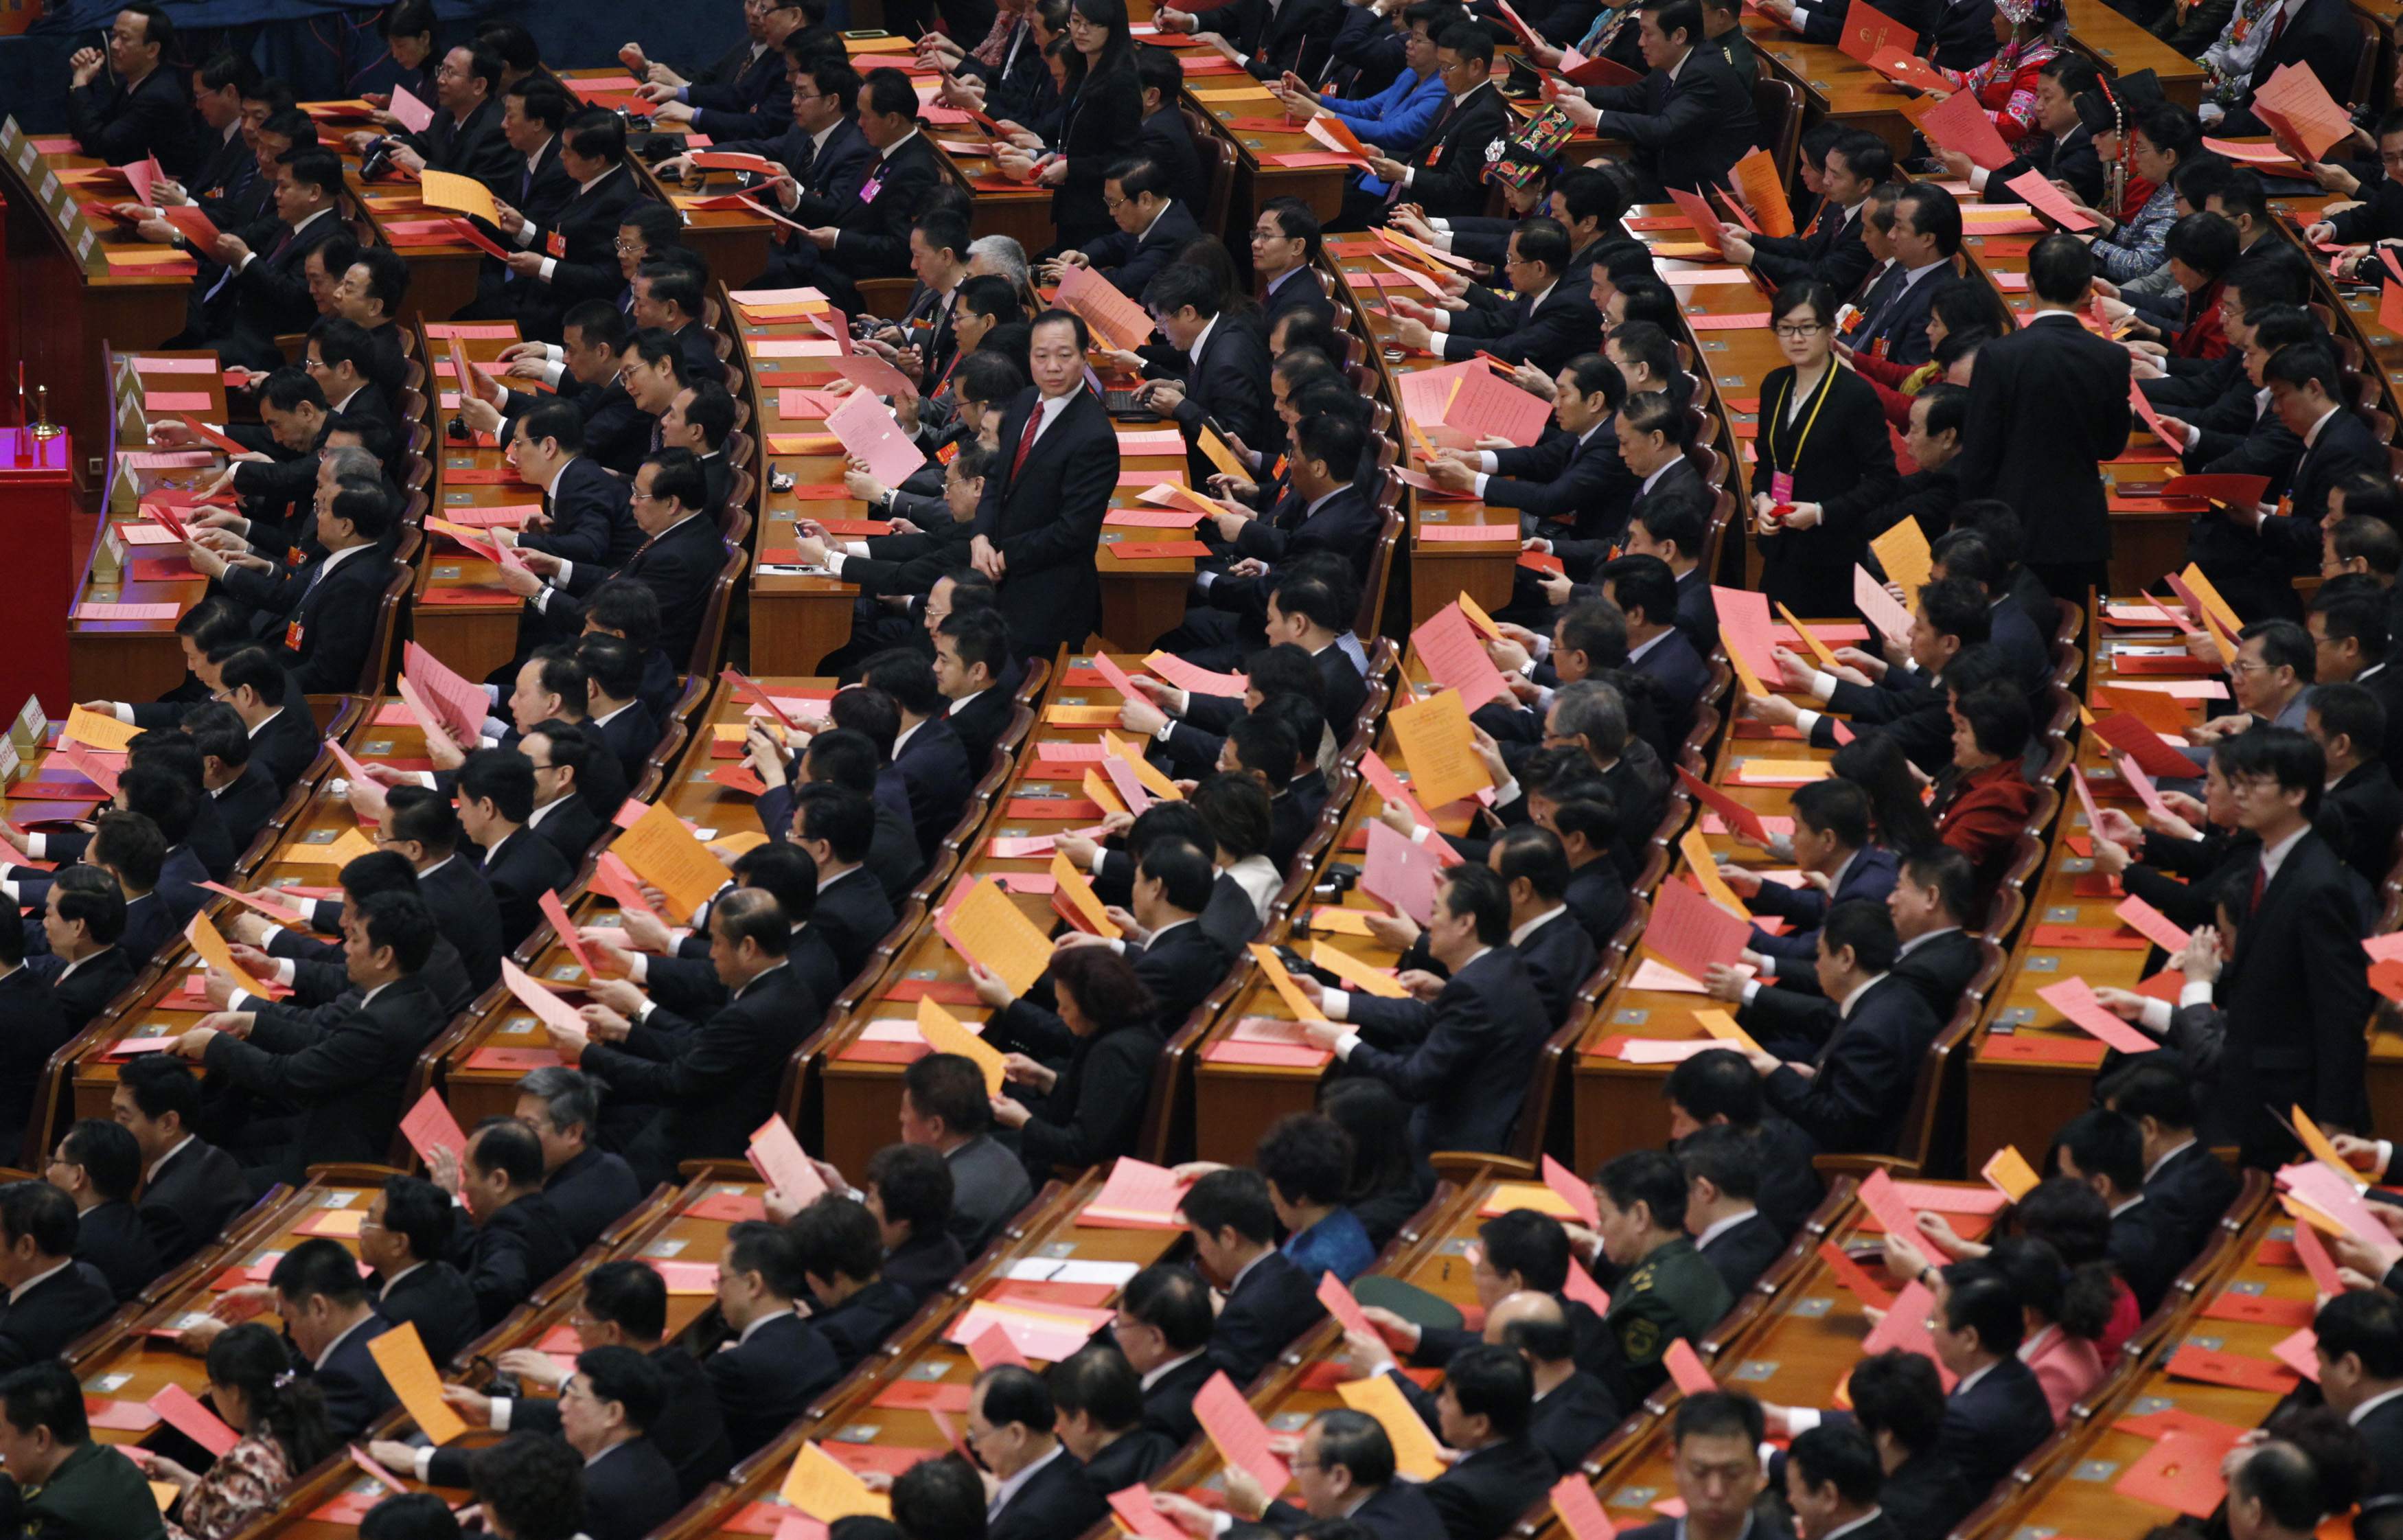 Delegates look at voting papers during the fifth plenary meeting of the National People's Congress at the Great Hall of the People in Beijing, March 15, 2013. Photo: Reuters